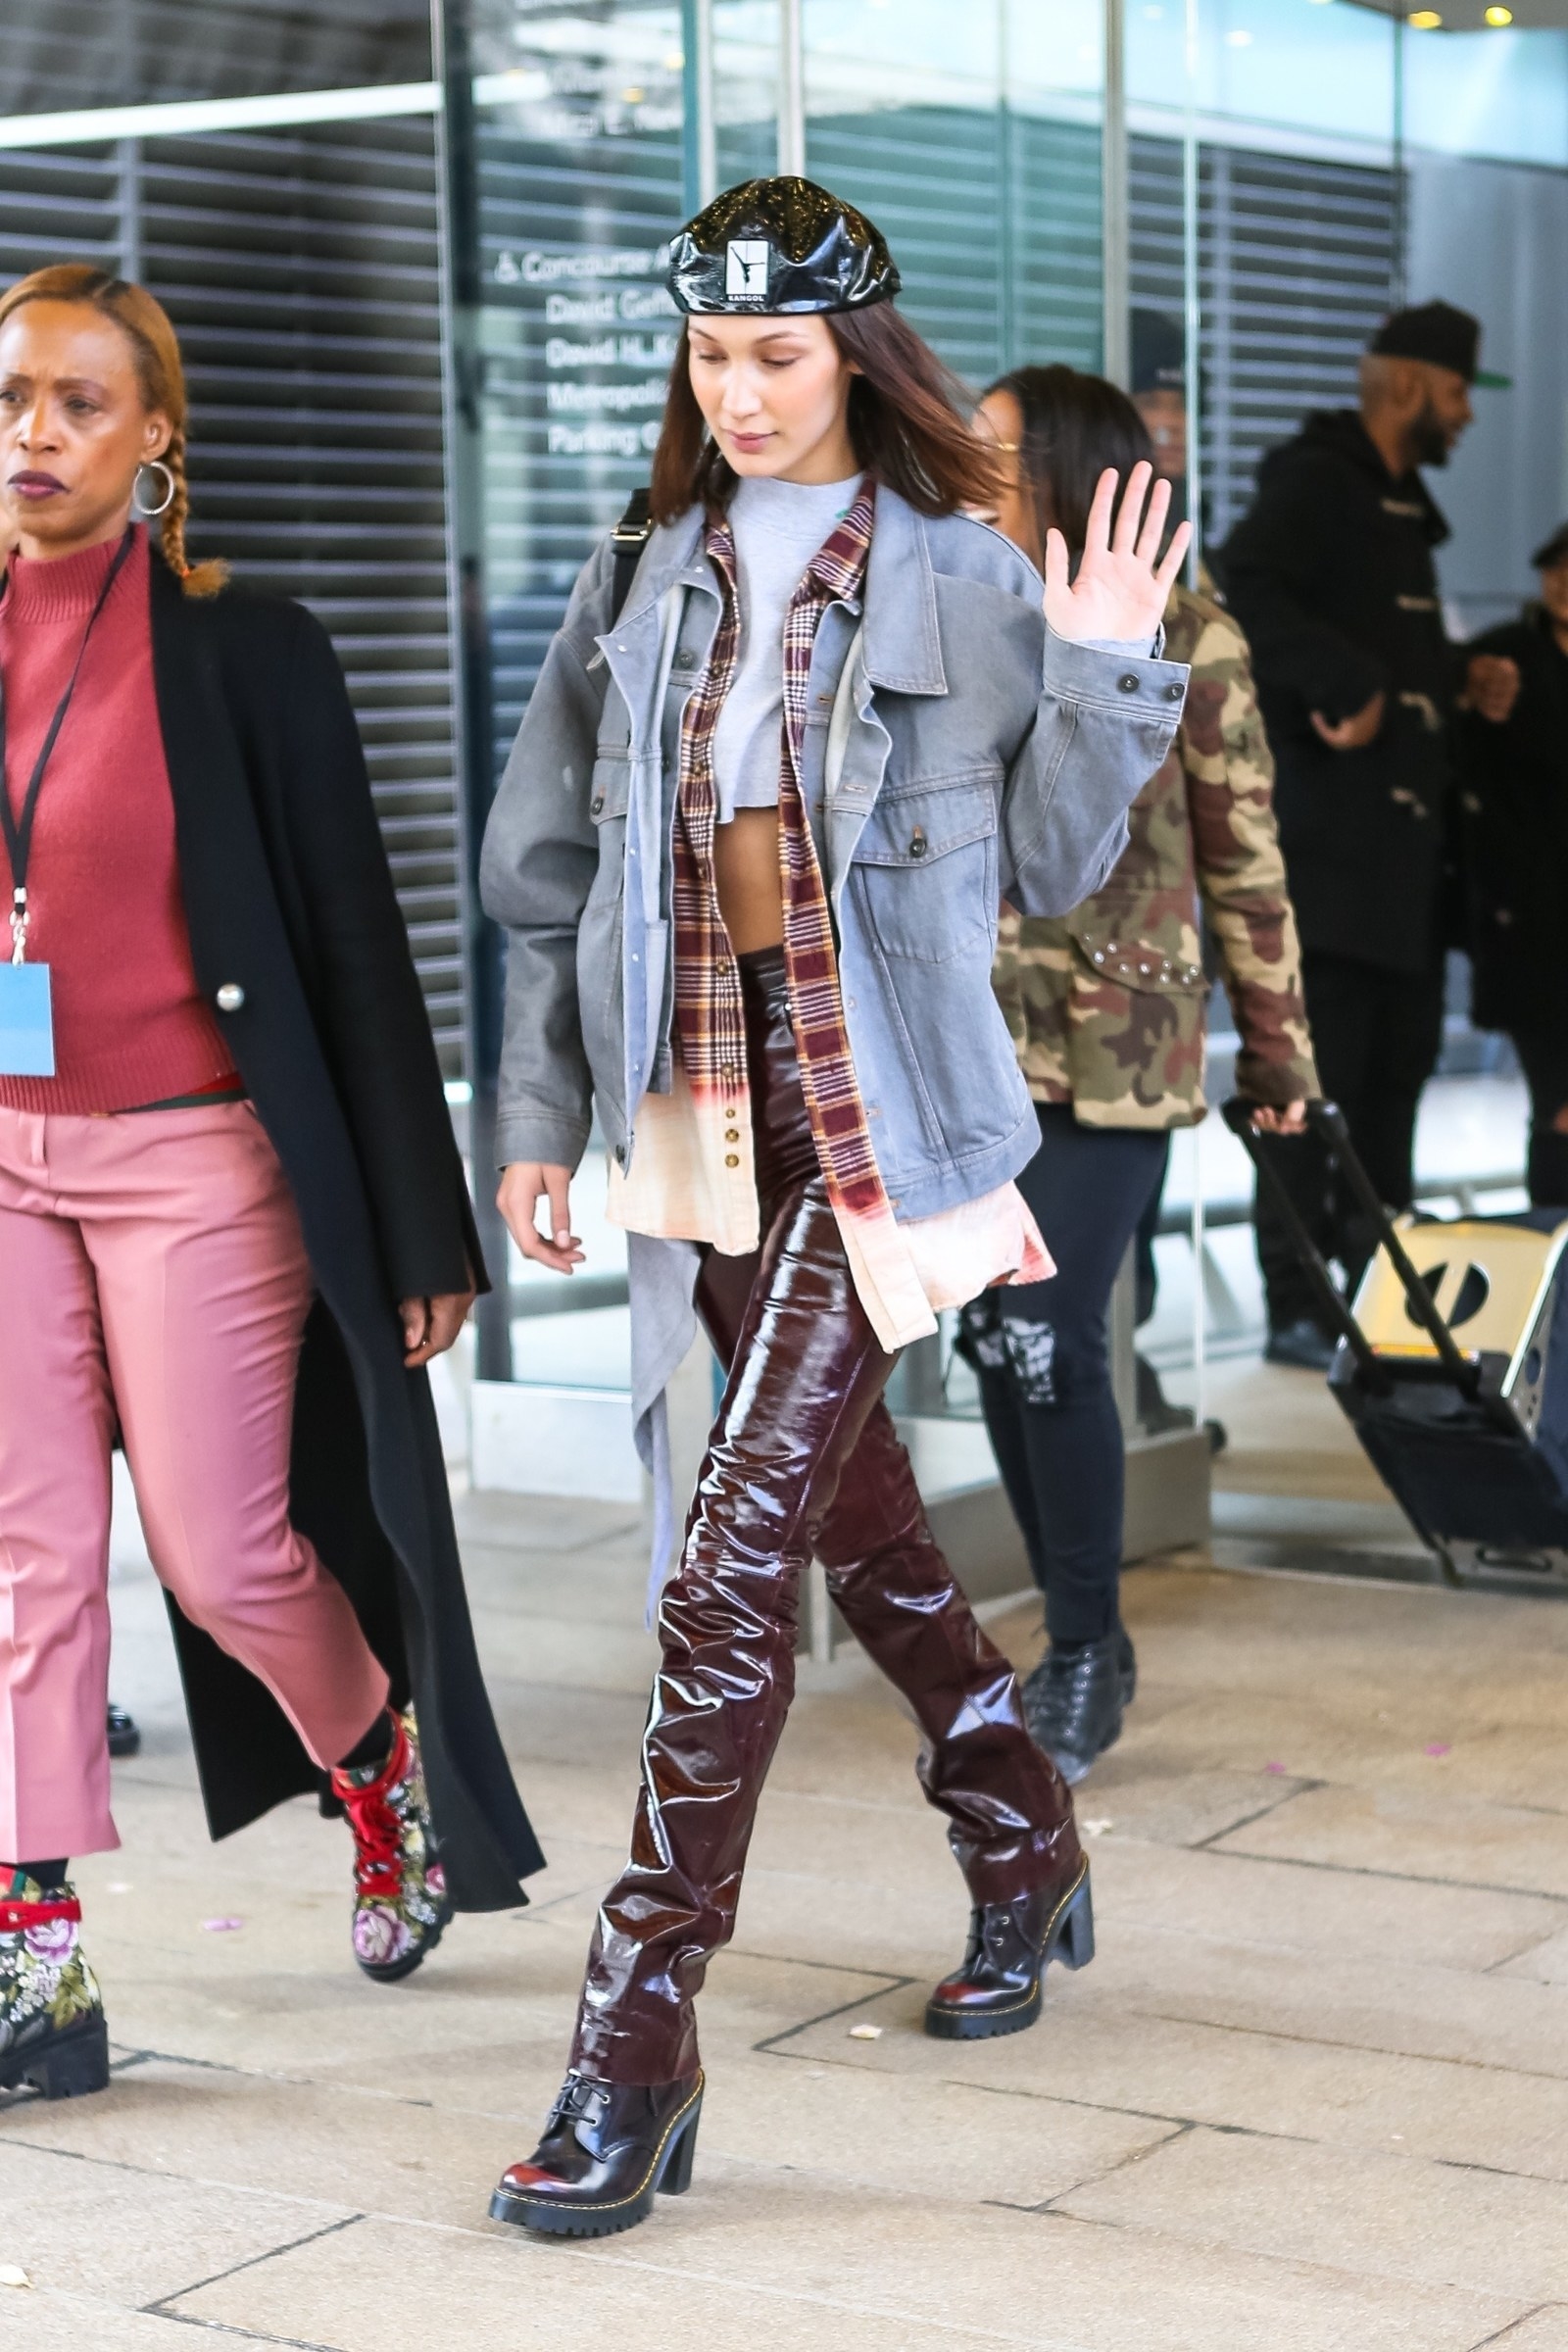 Bella Hadid wears some impressively terrible outfits